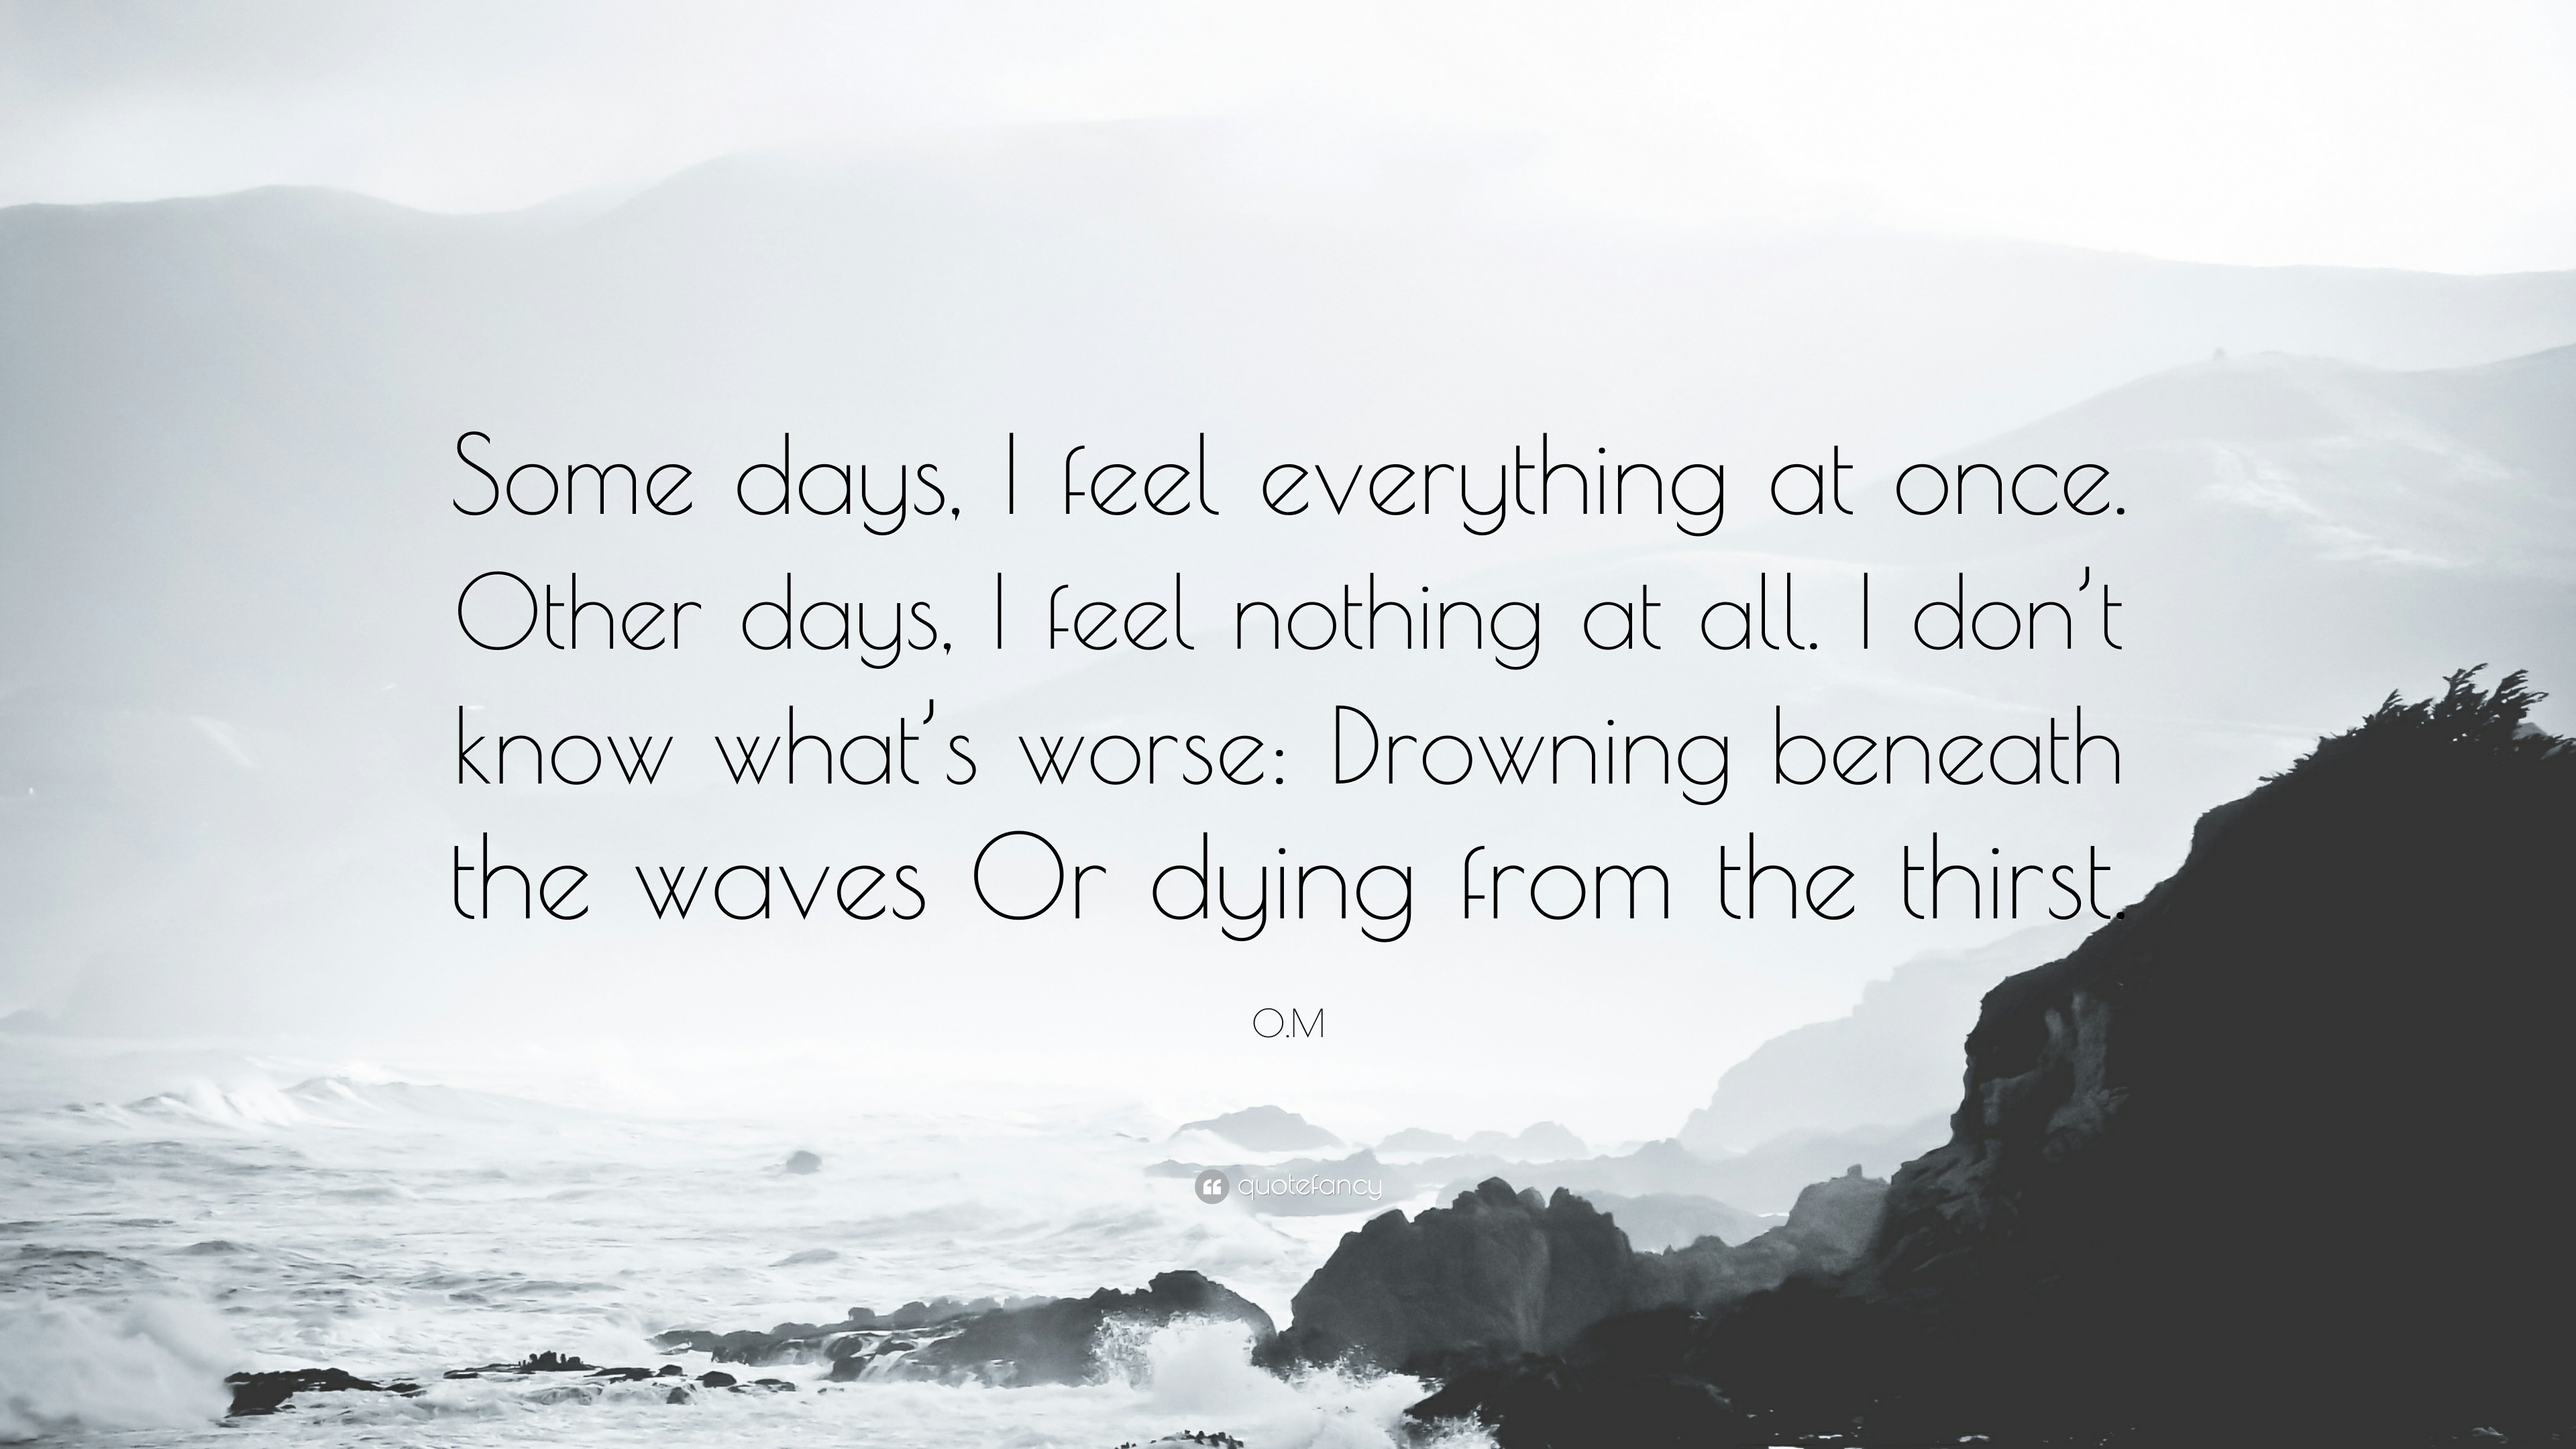 O.M Quote: “Some days, I feel everything at once. Other days, I feel  nothing at all. I don't know what's worse: Drowning beneath the...”